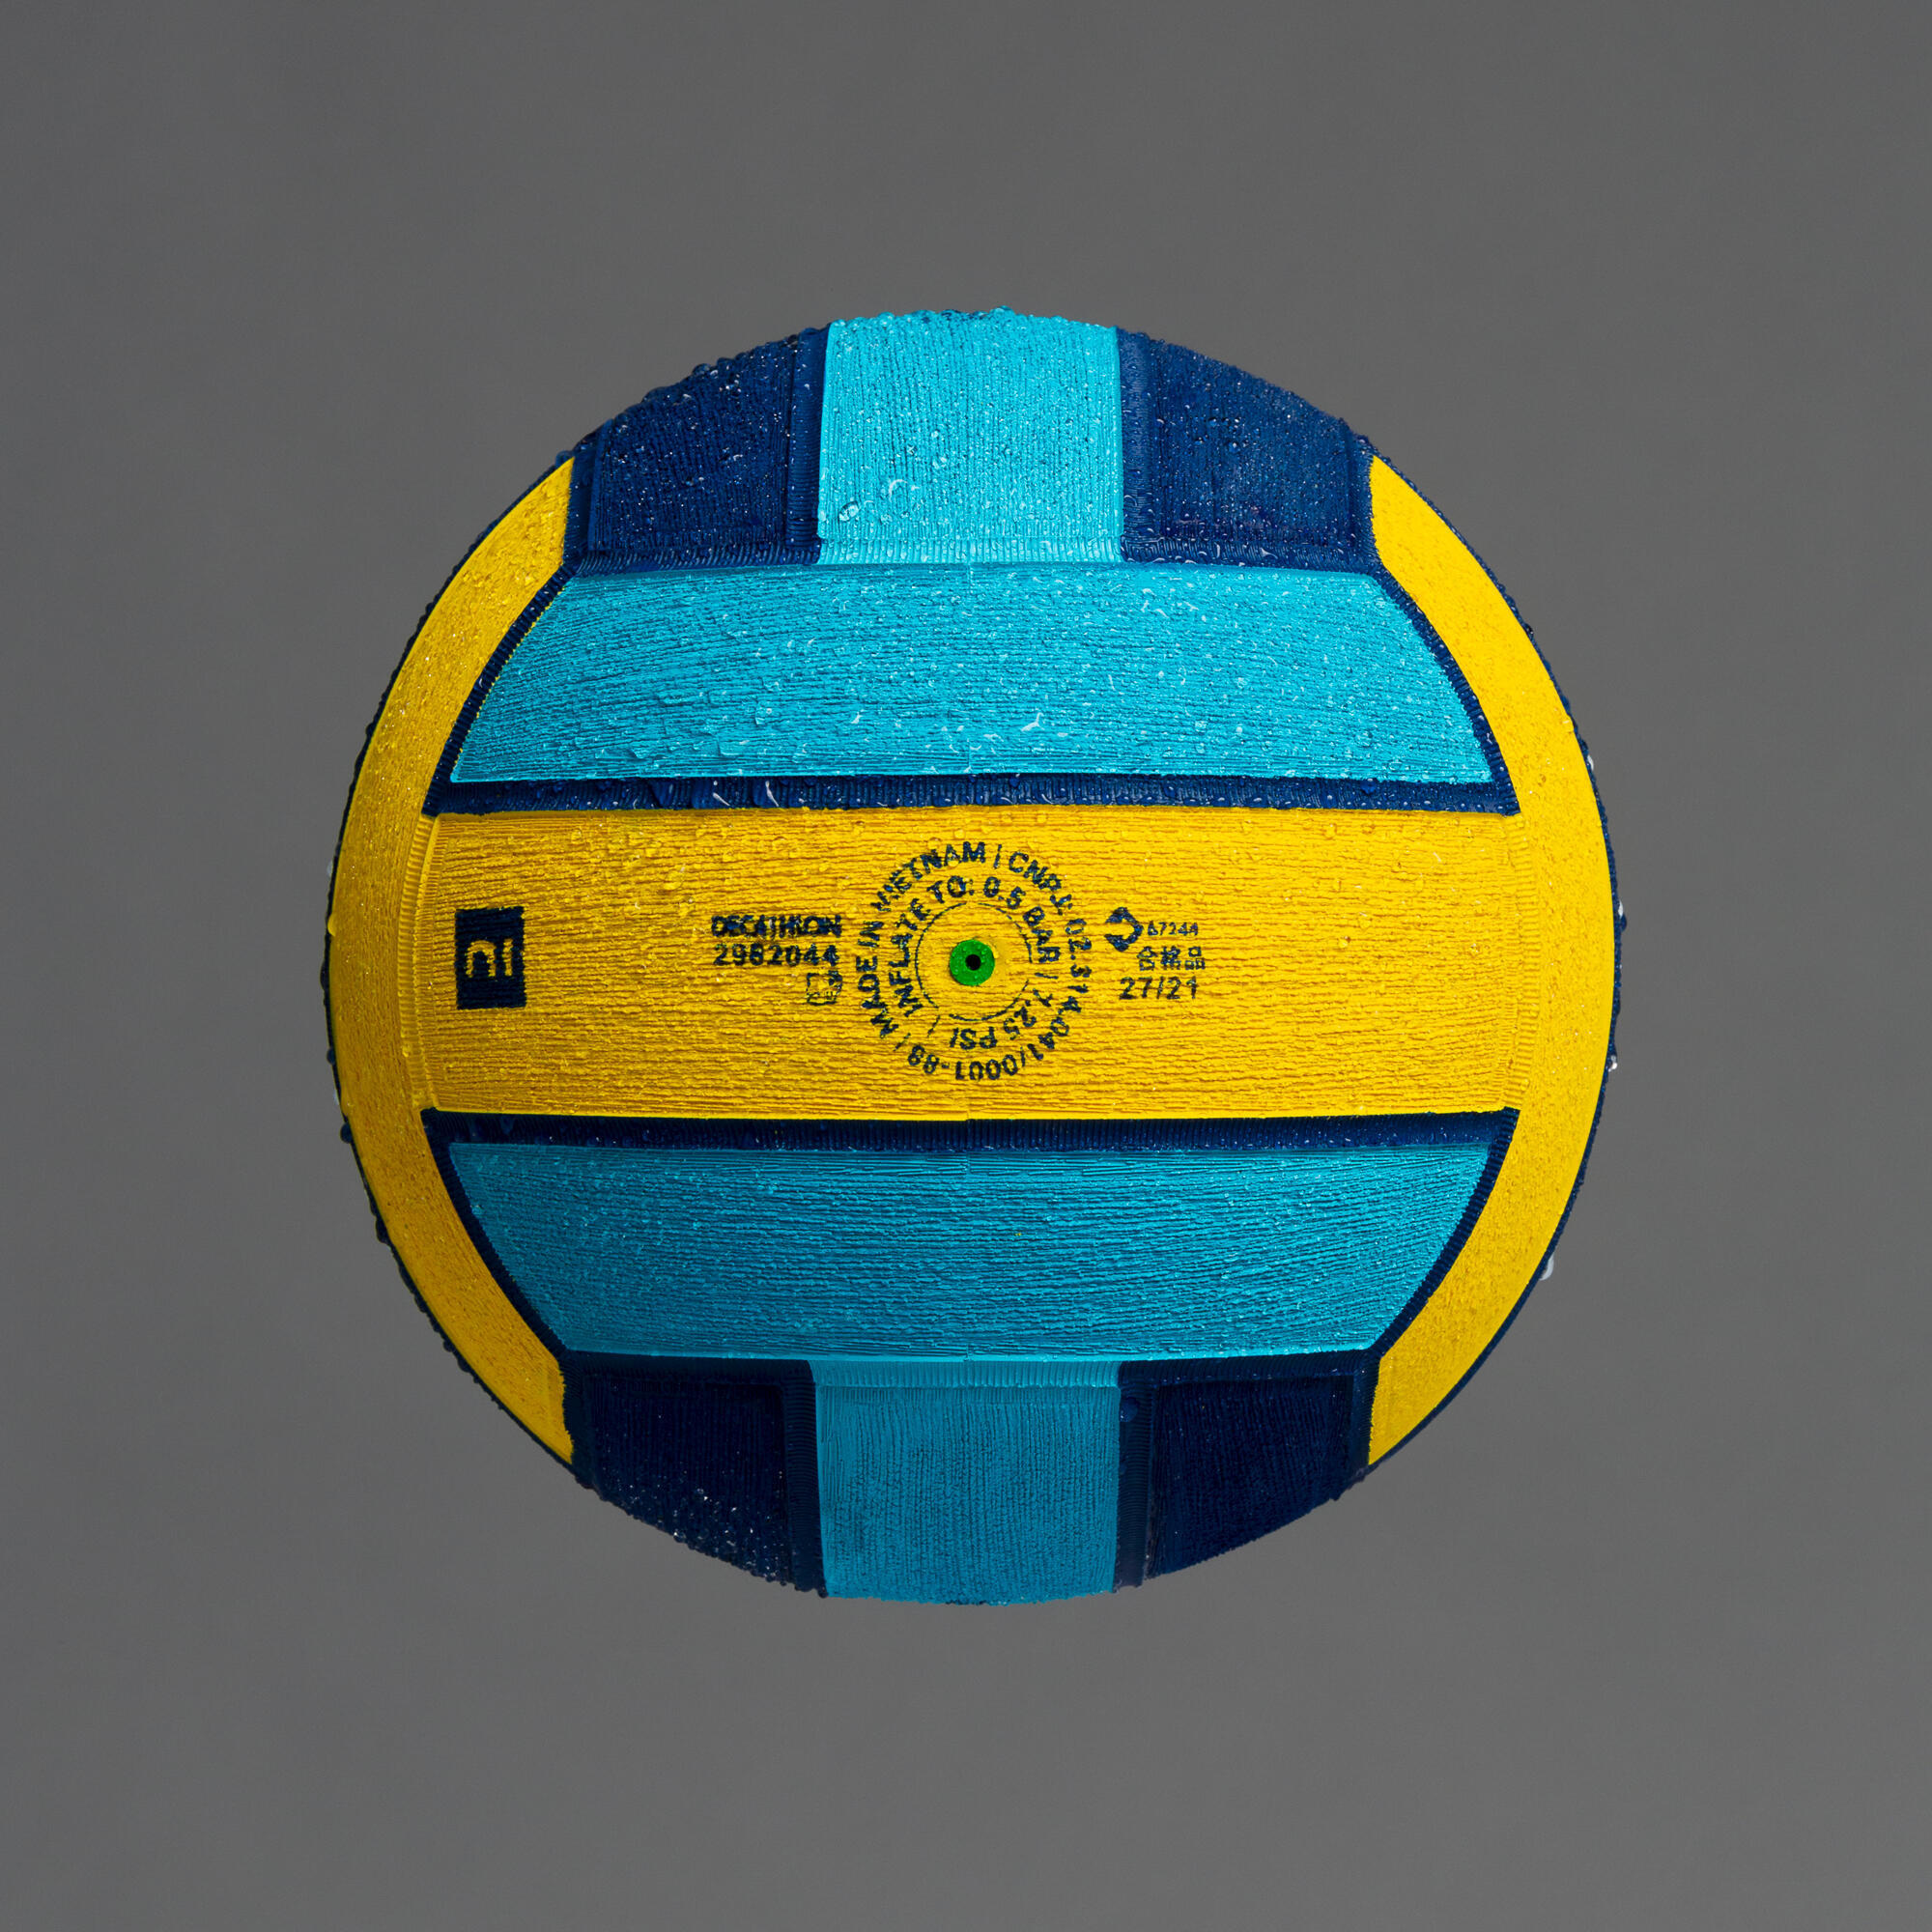 WATER POLO BALL WP900 SIZE 4 4/5